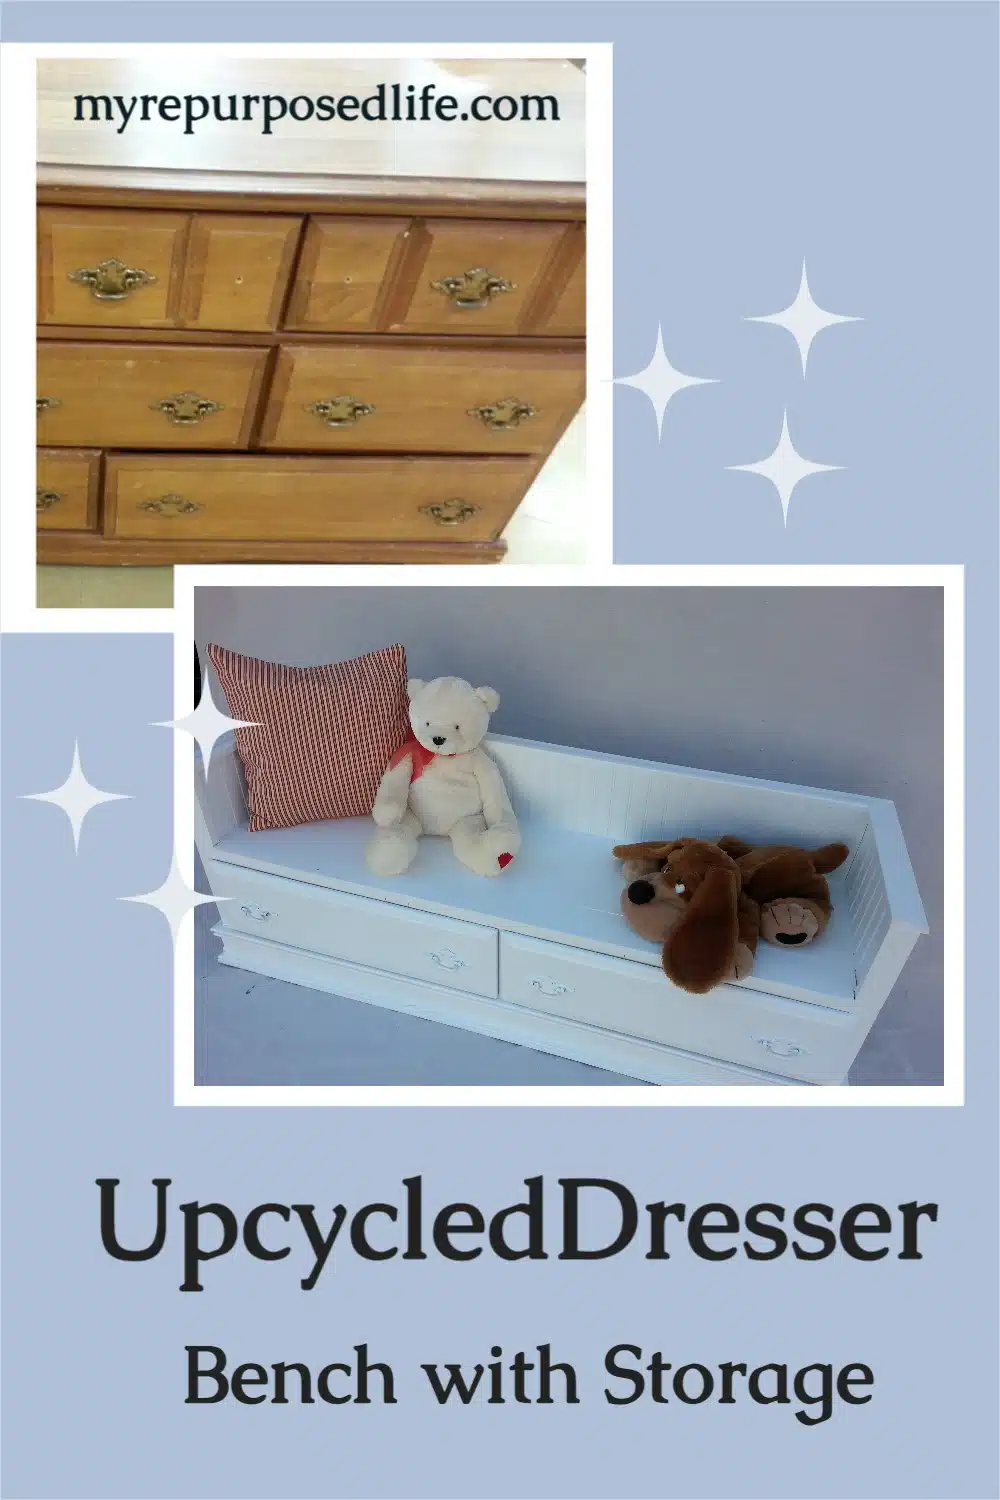 Use an old (cheap) dresser to repurpose into a bench with storage, perfect for the kids! Step by step directions included so you can do this project yourself. #MyRepurposedLife #repurposed #dresser #bench #kids #furniture via @repurposedlife